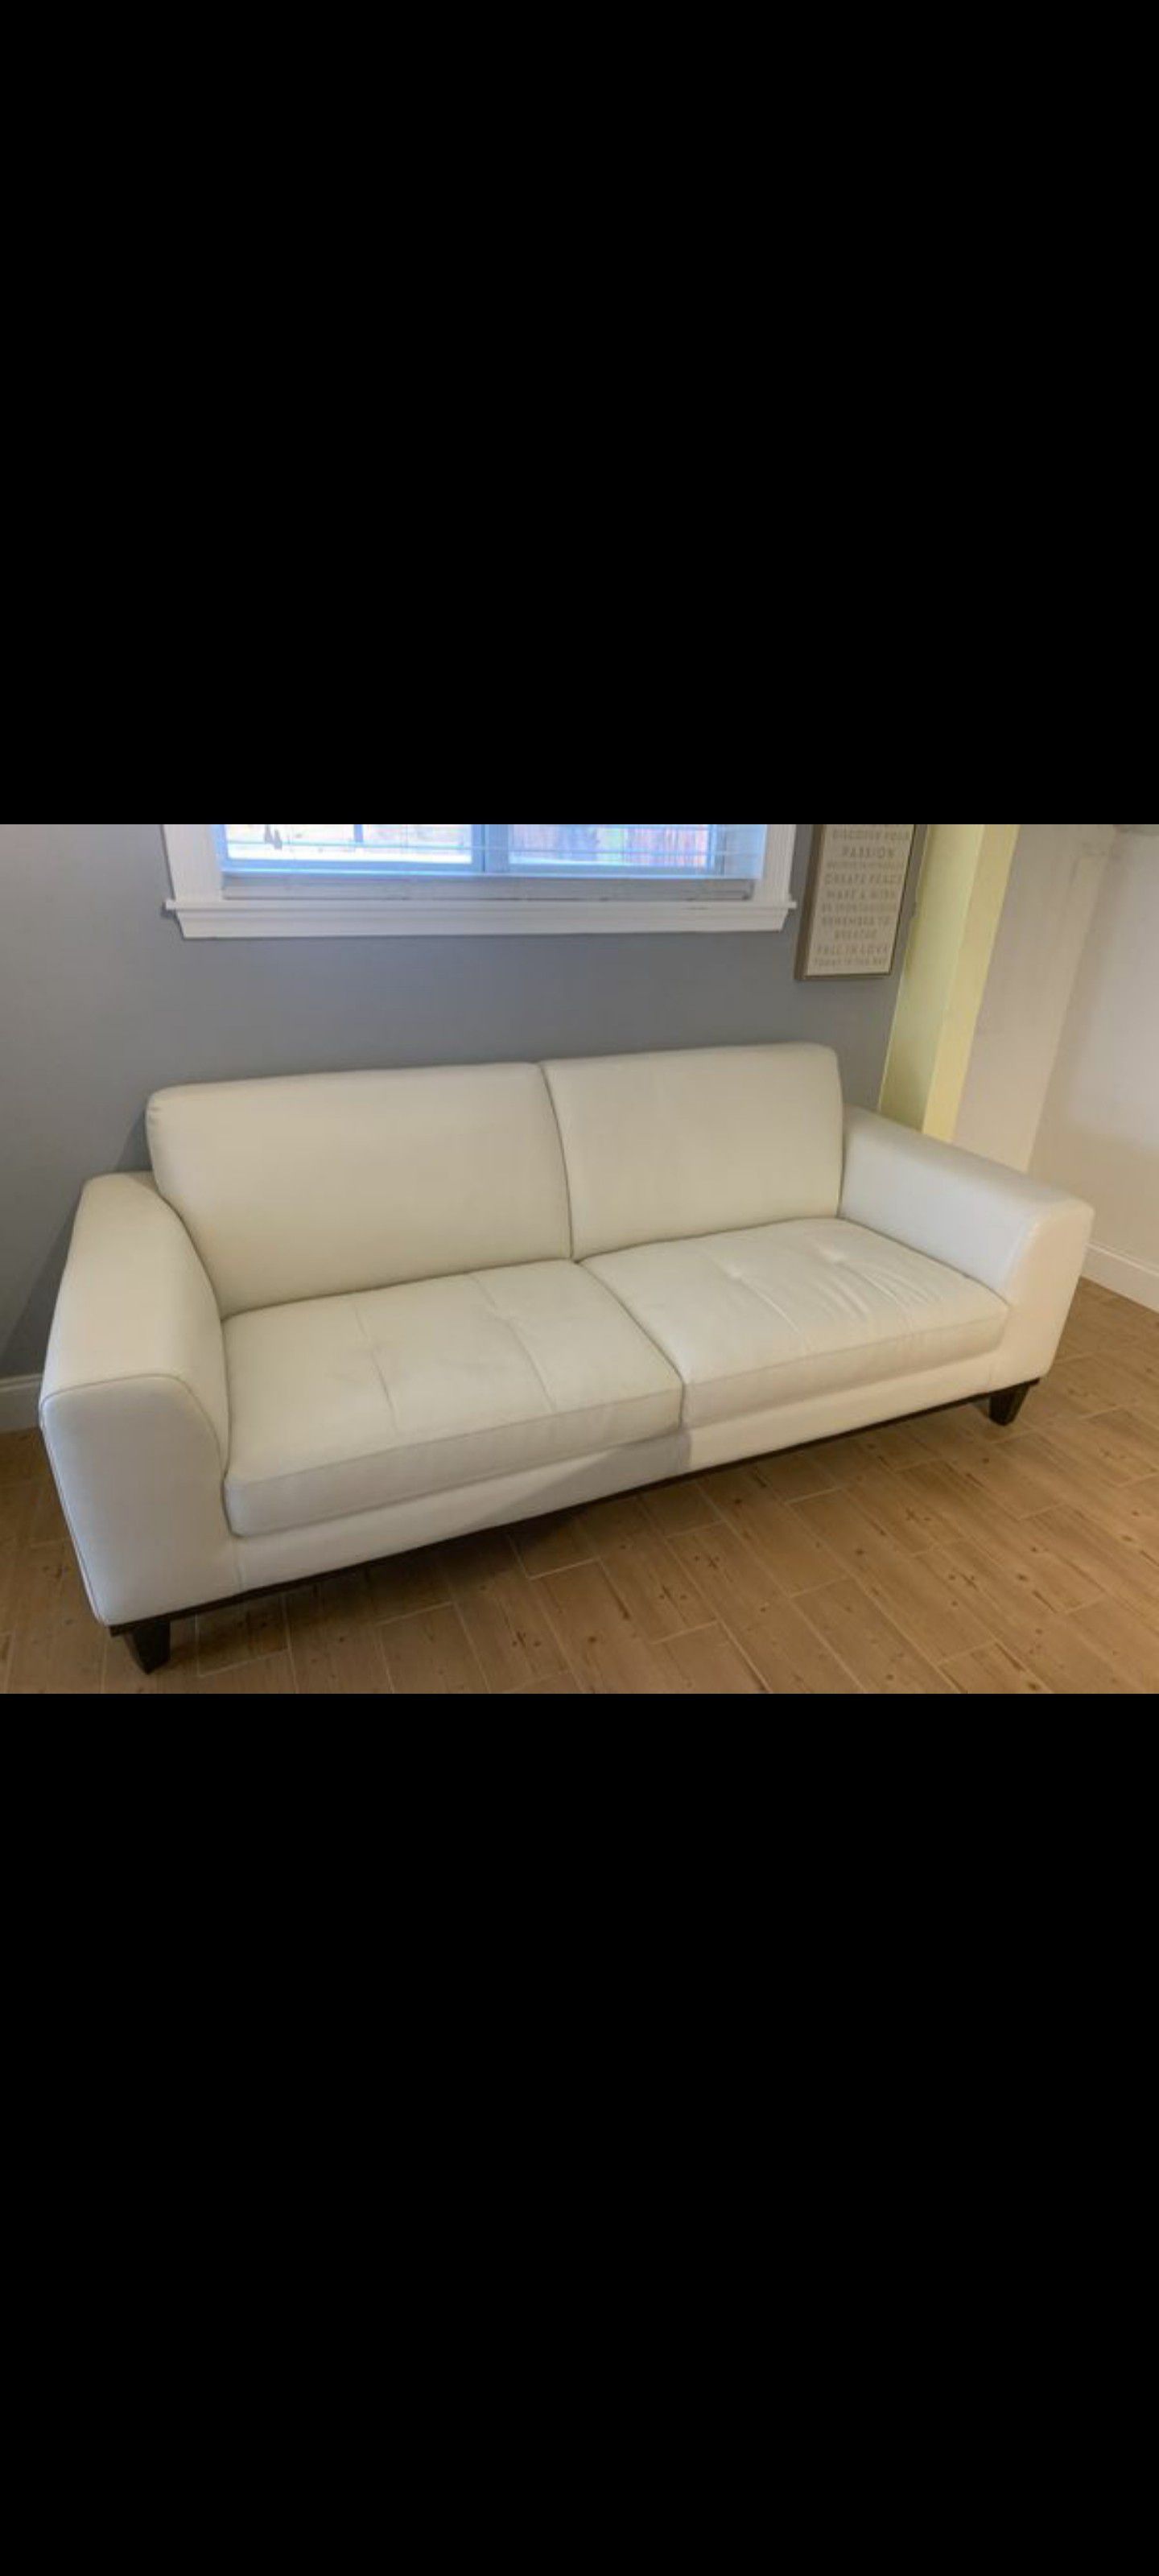 Off white leather couch almost NEW!